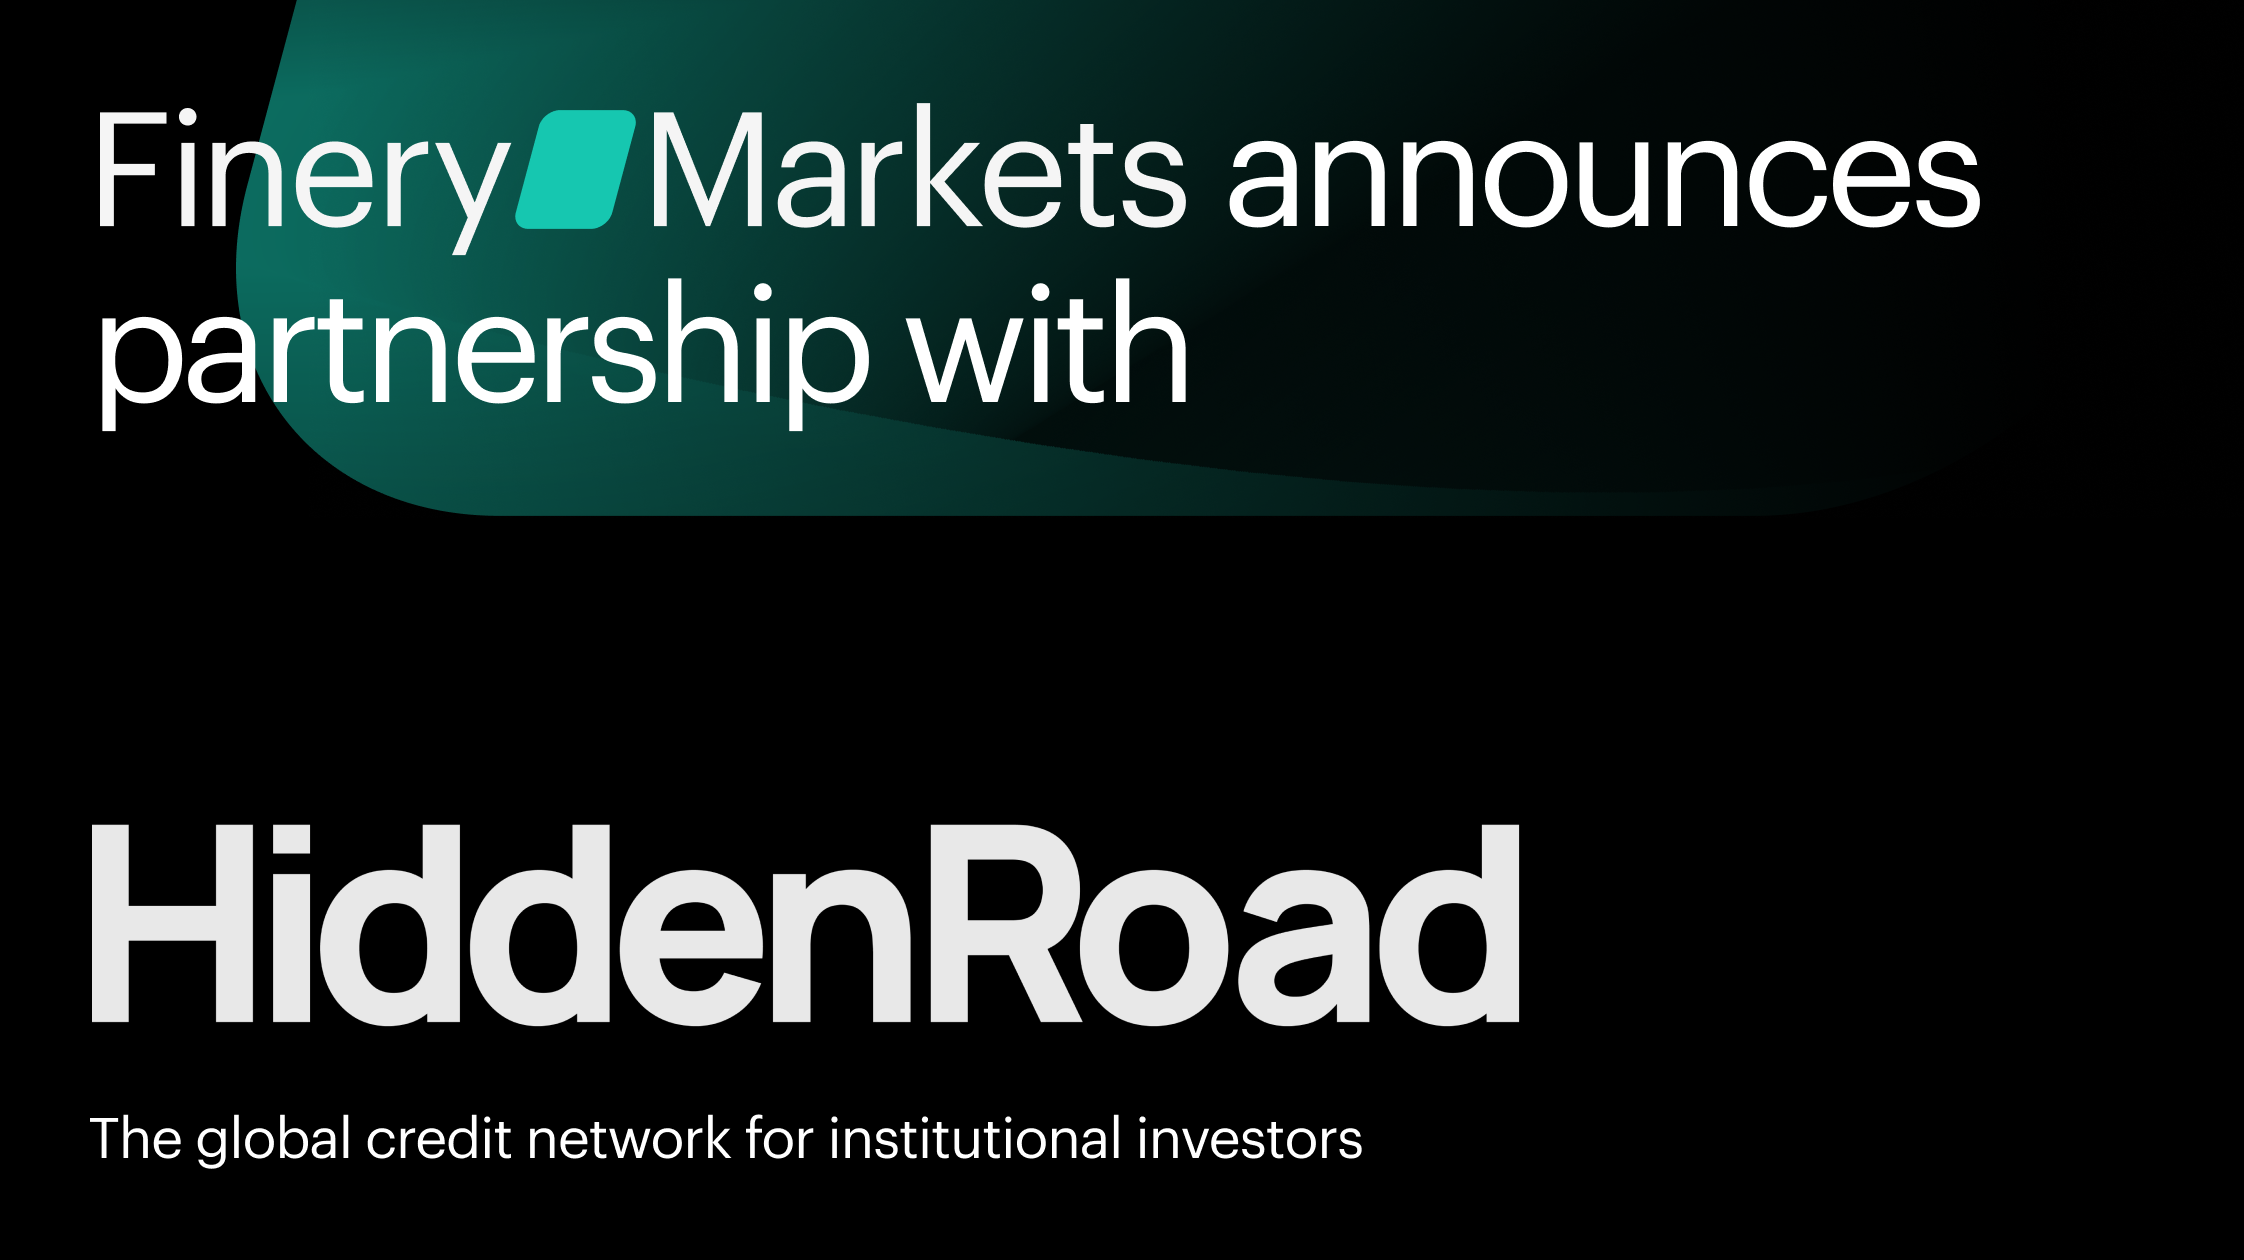 Finery Markets announces partnership with HiddenRoad